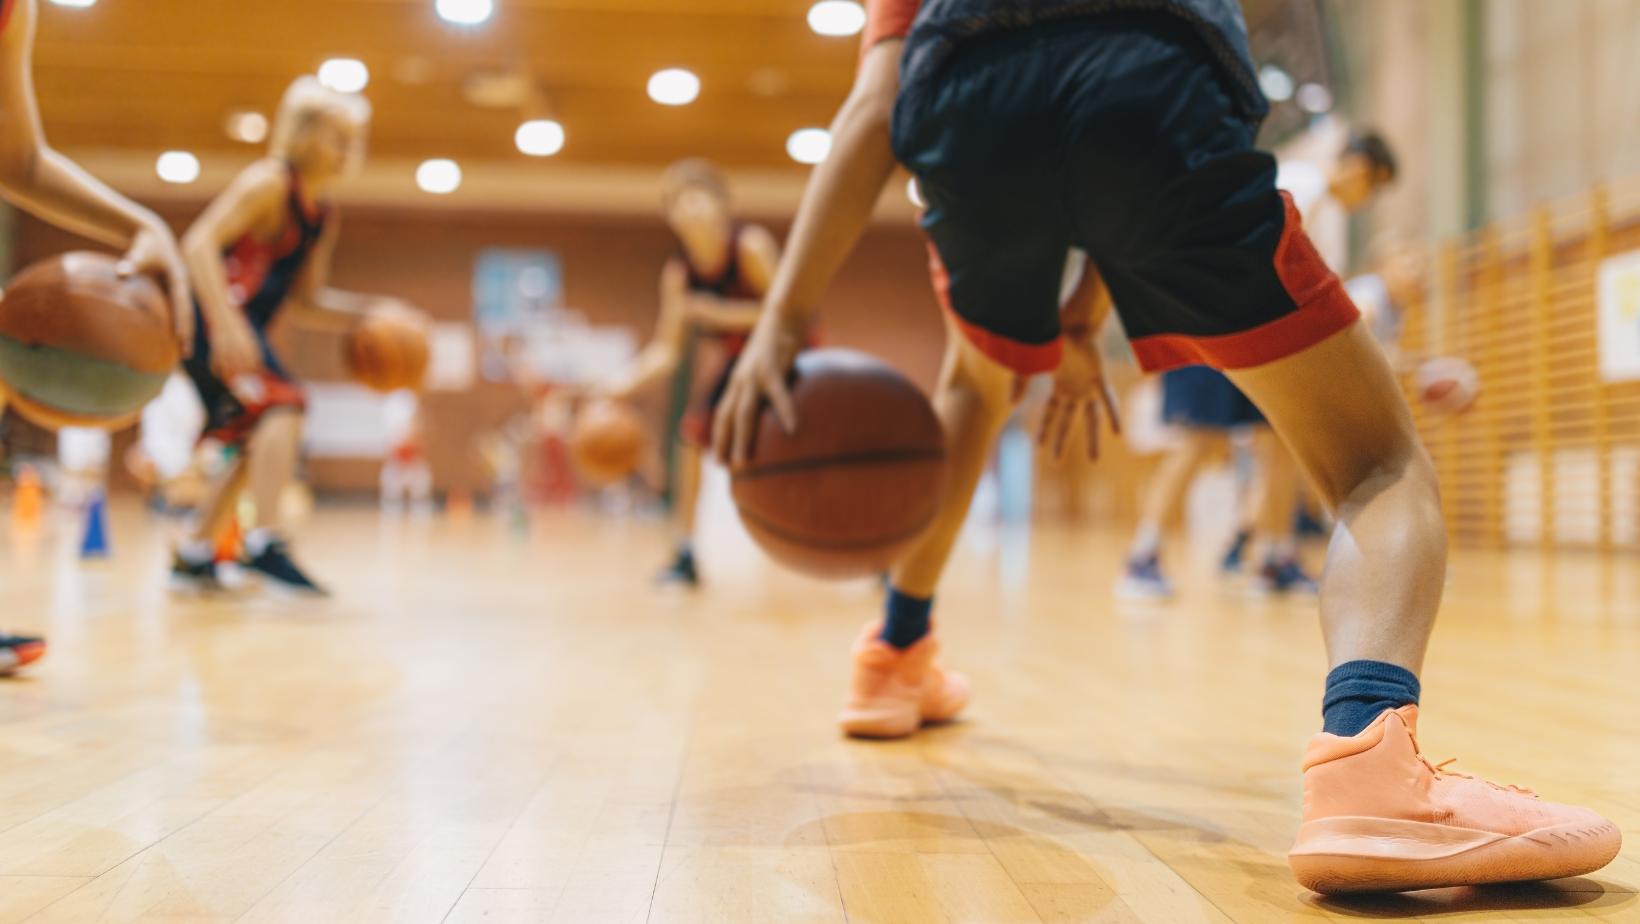 Lower Extremity Basketball Injuries